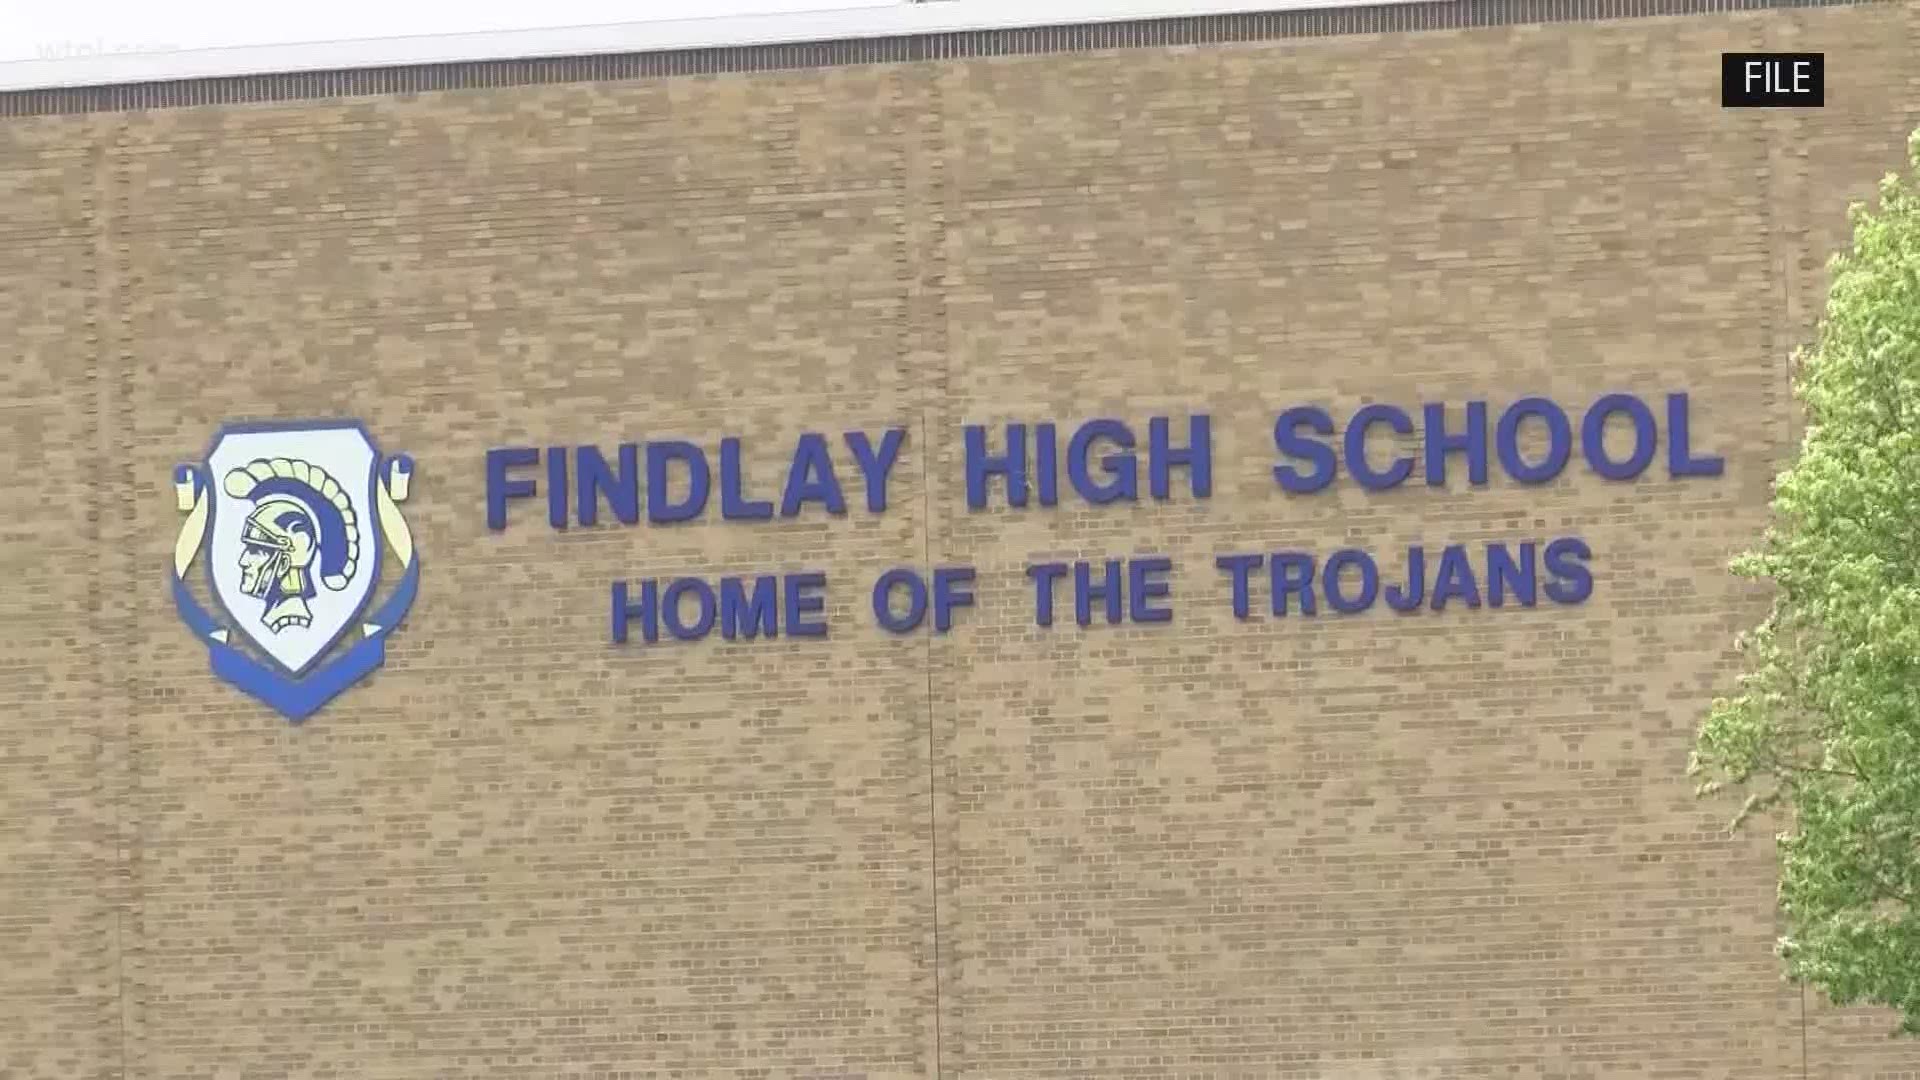 Findlay high school students will not be assigned a locker this school year to alleviate crowding in hallways.